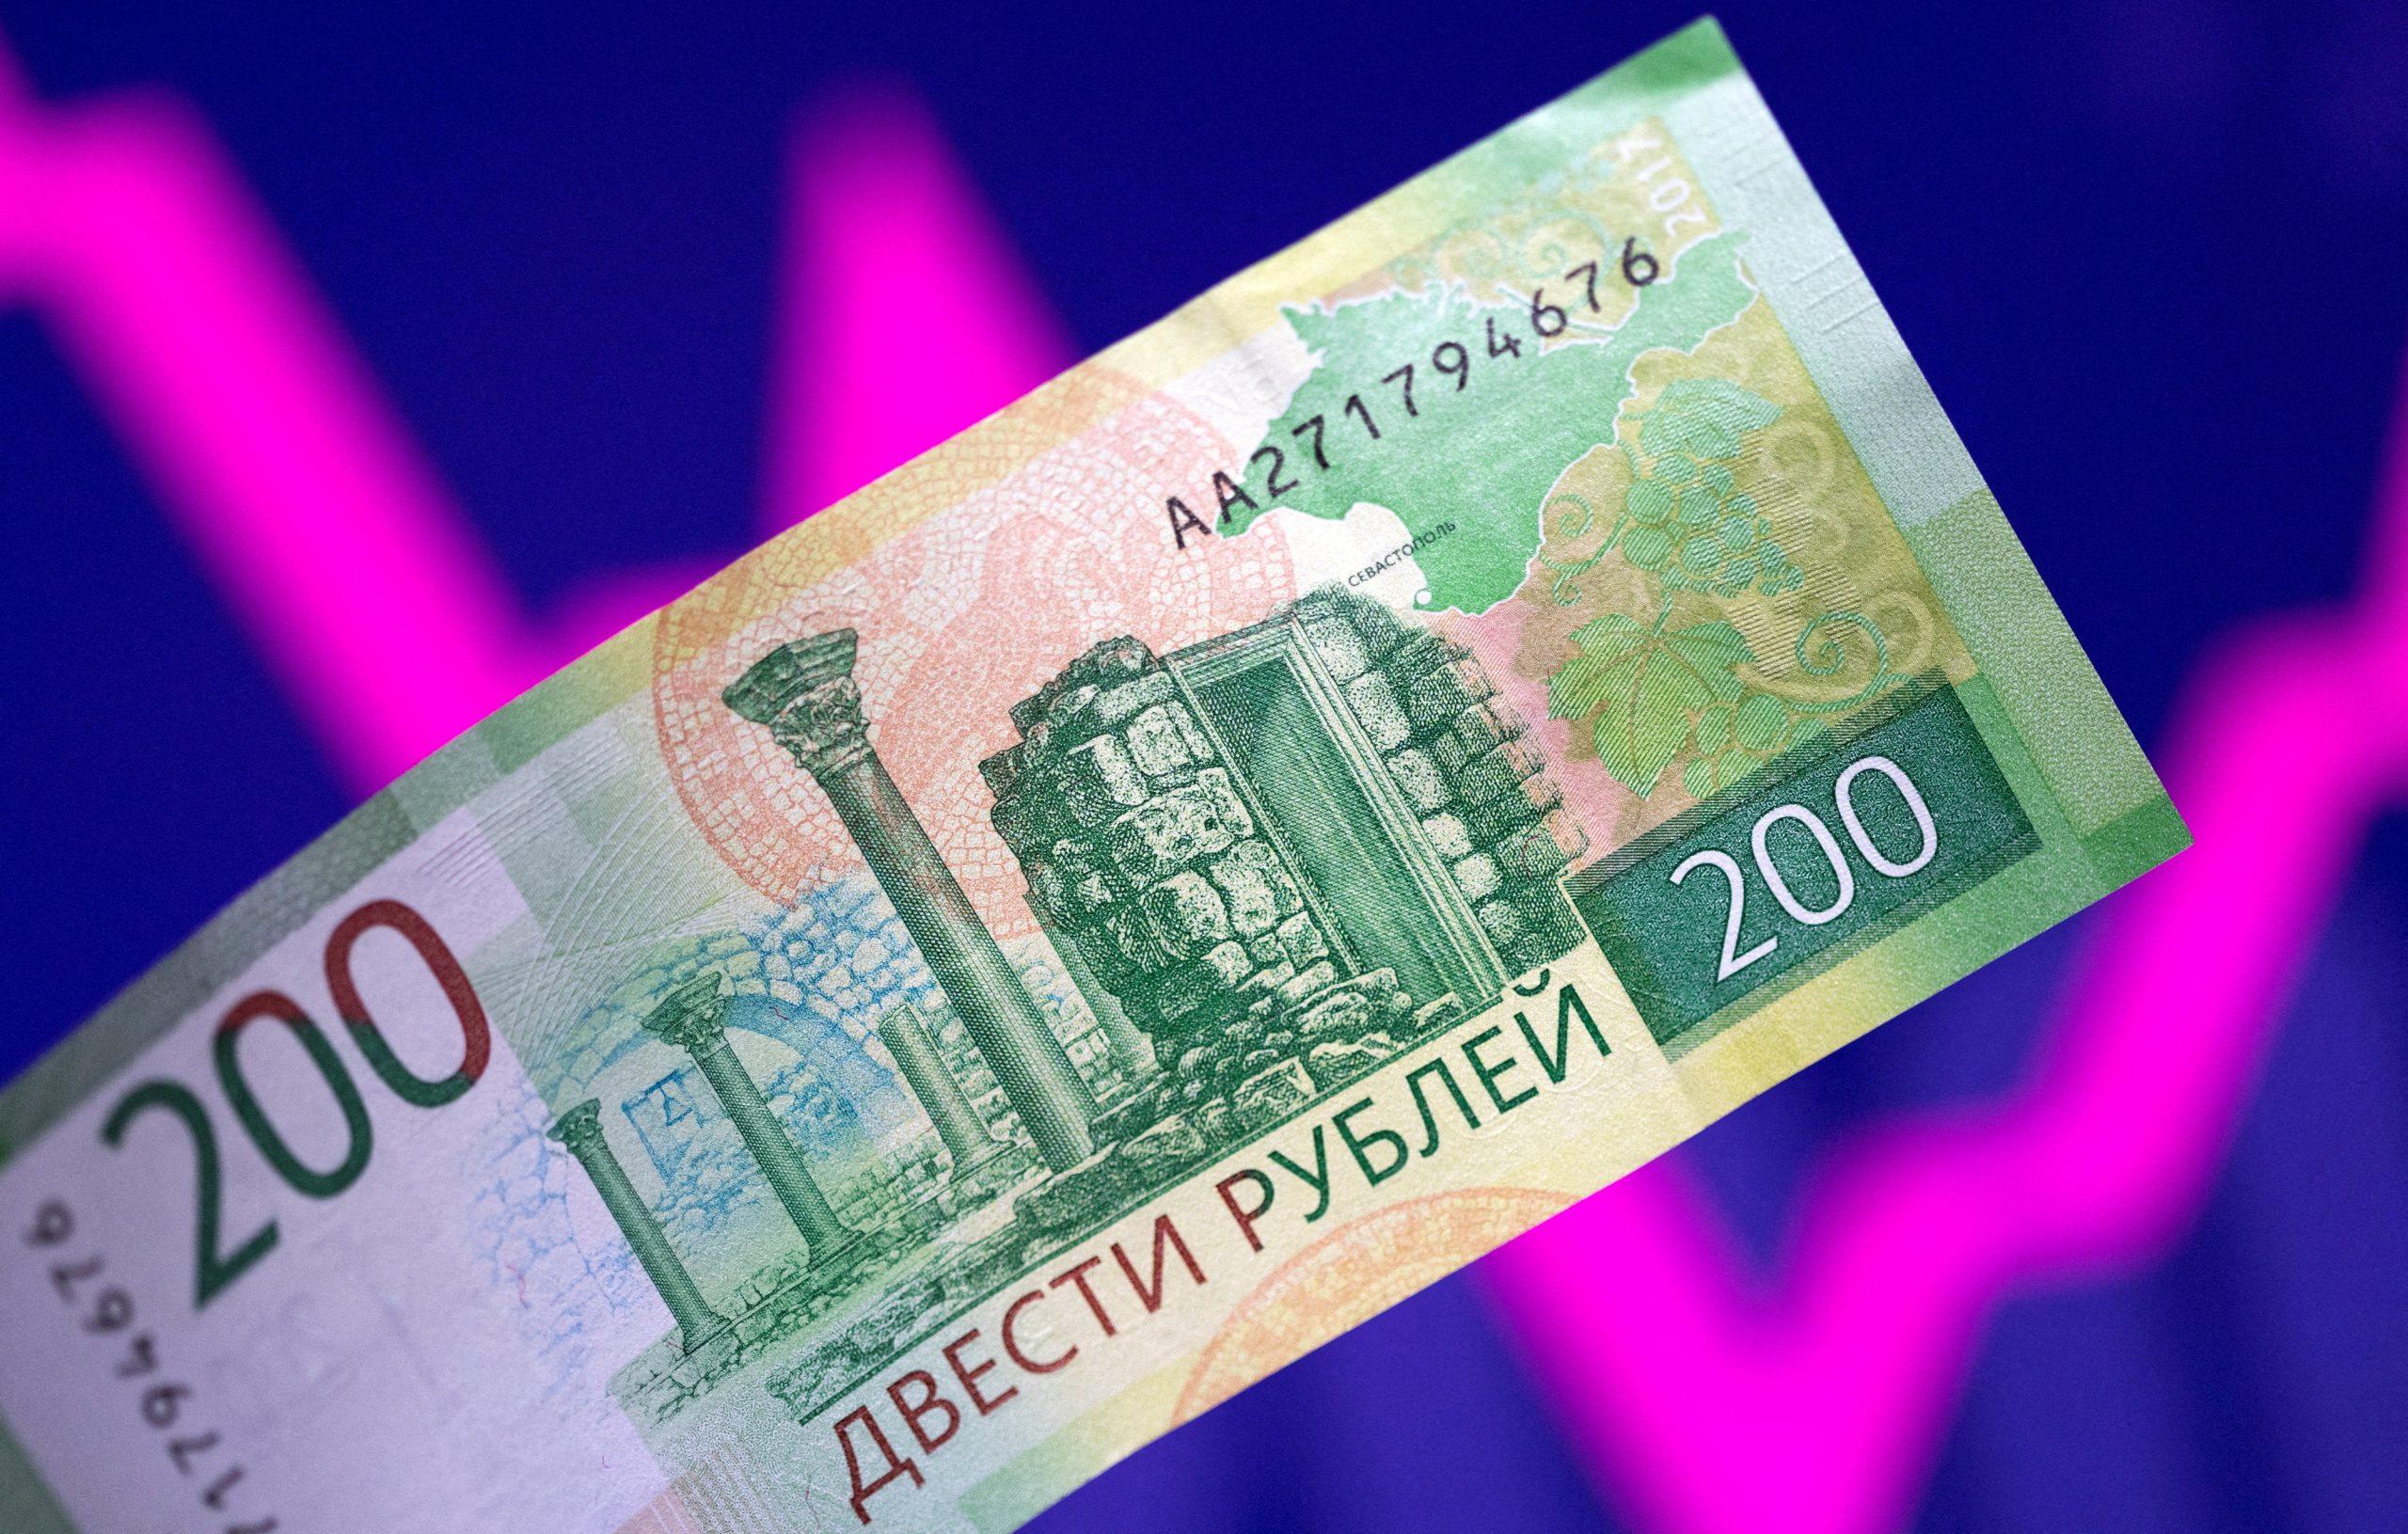 Russia's official currency is the Russian ruble